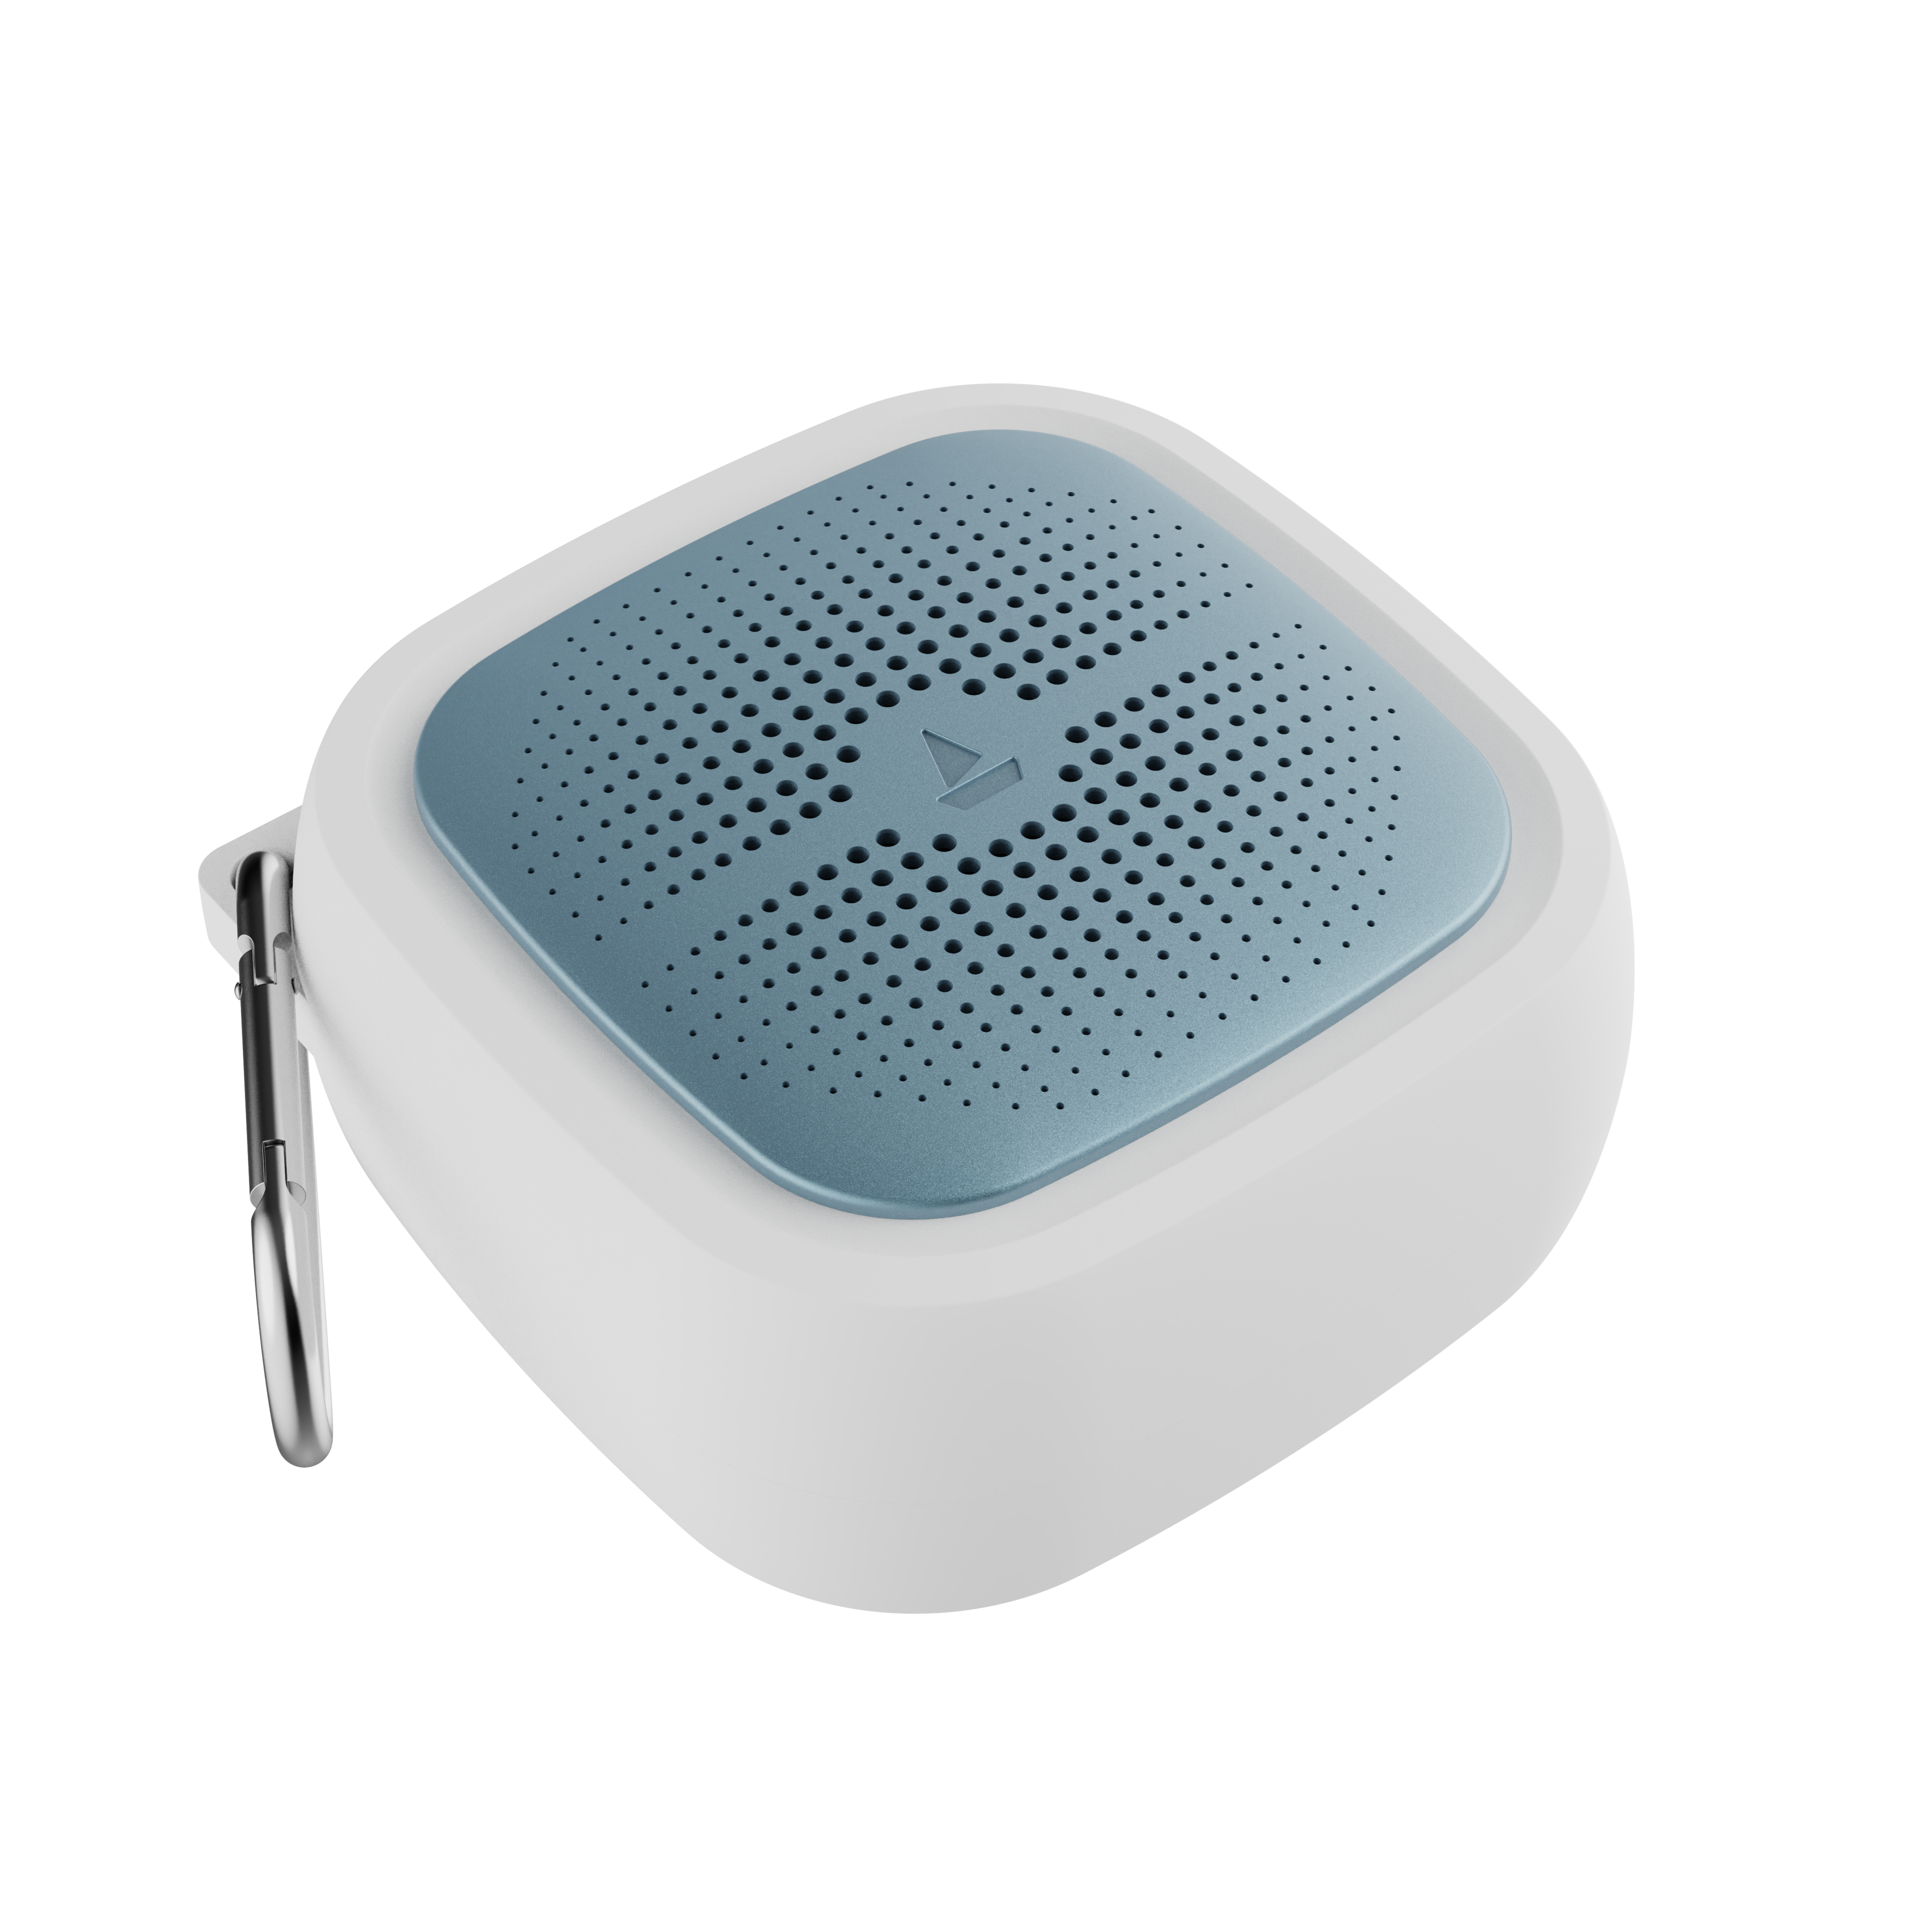 Stone 200 | Mini Bluetooth Speaker with 10 Hours of Playtime, IPX6 Water Resistant, Smart Integrated Controls - boAt Lifestyle